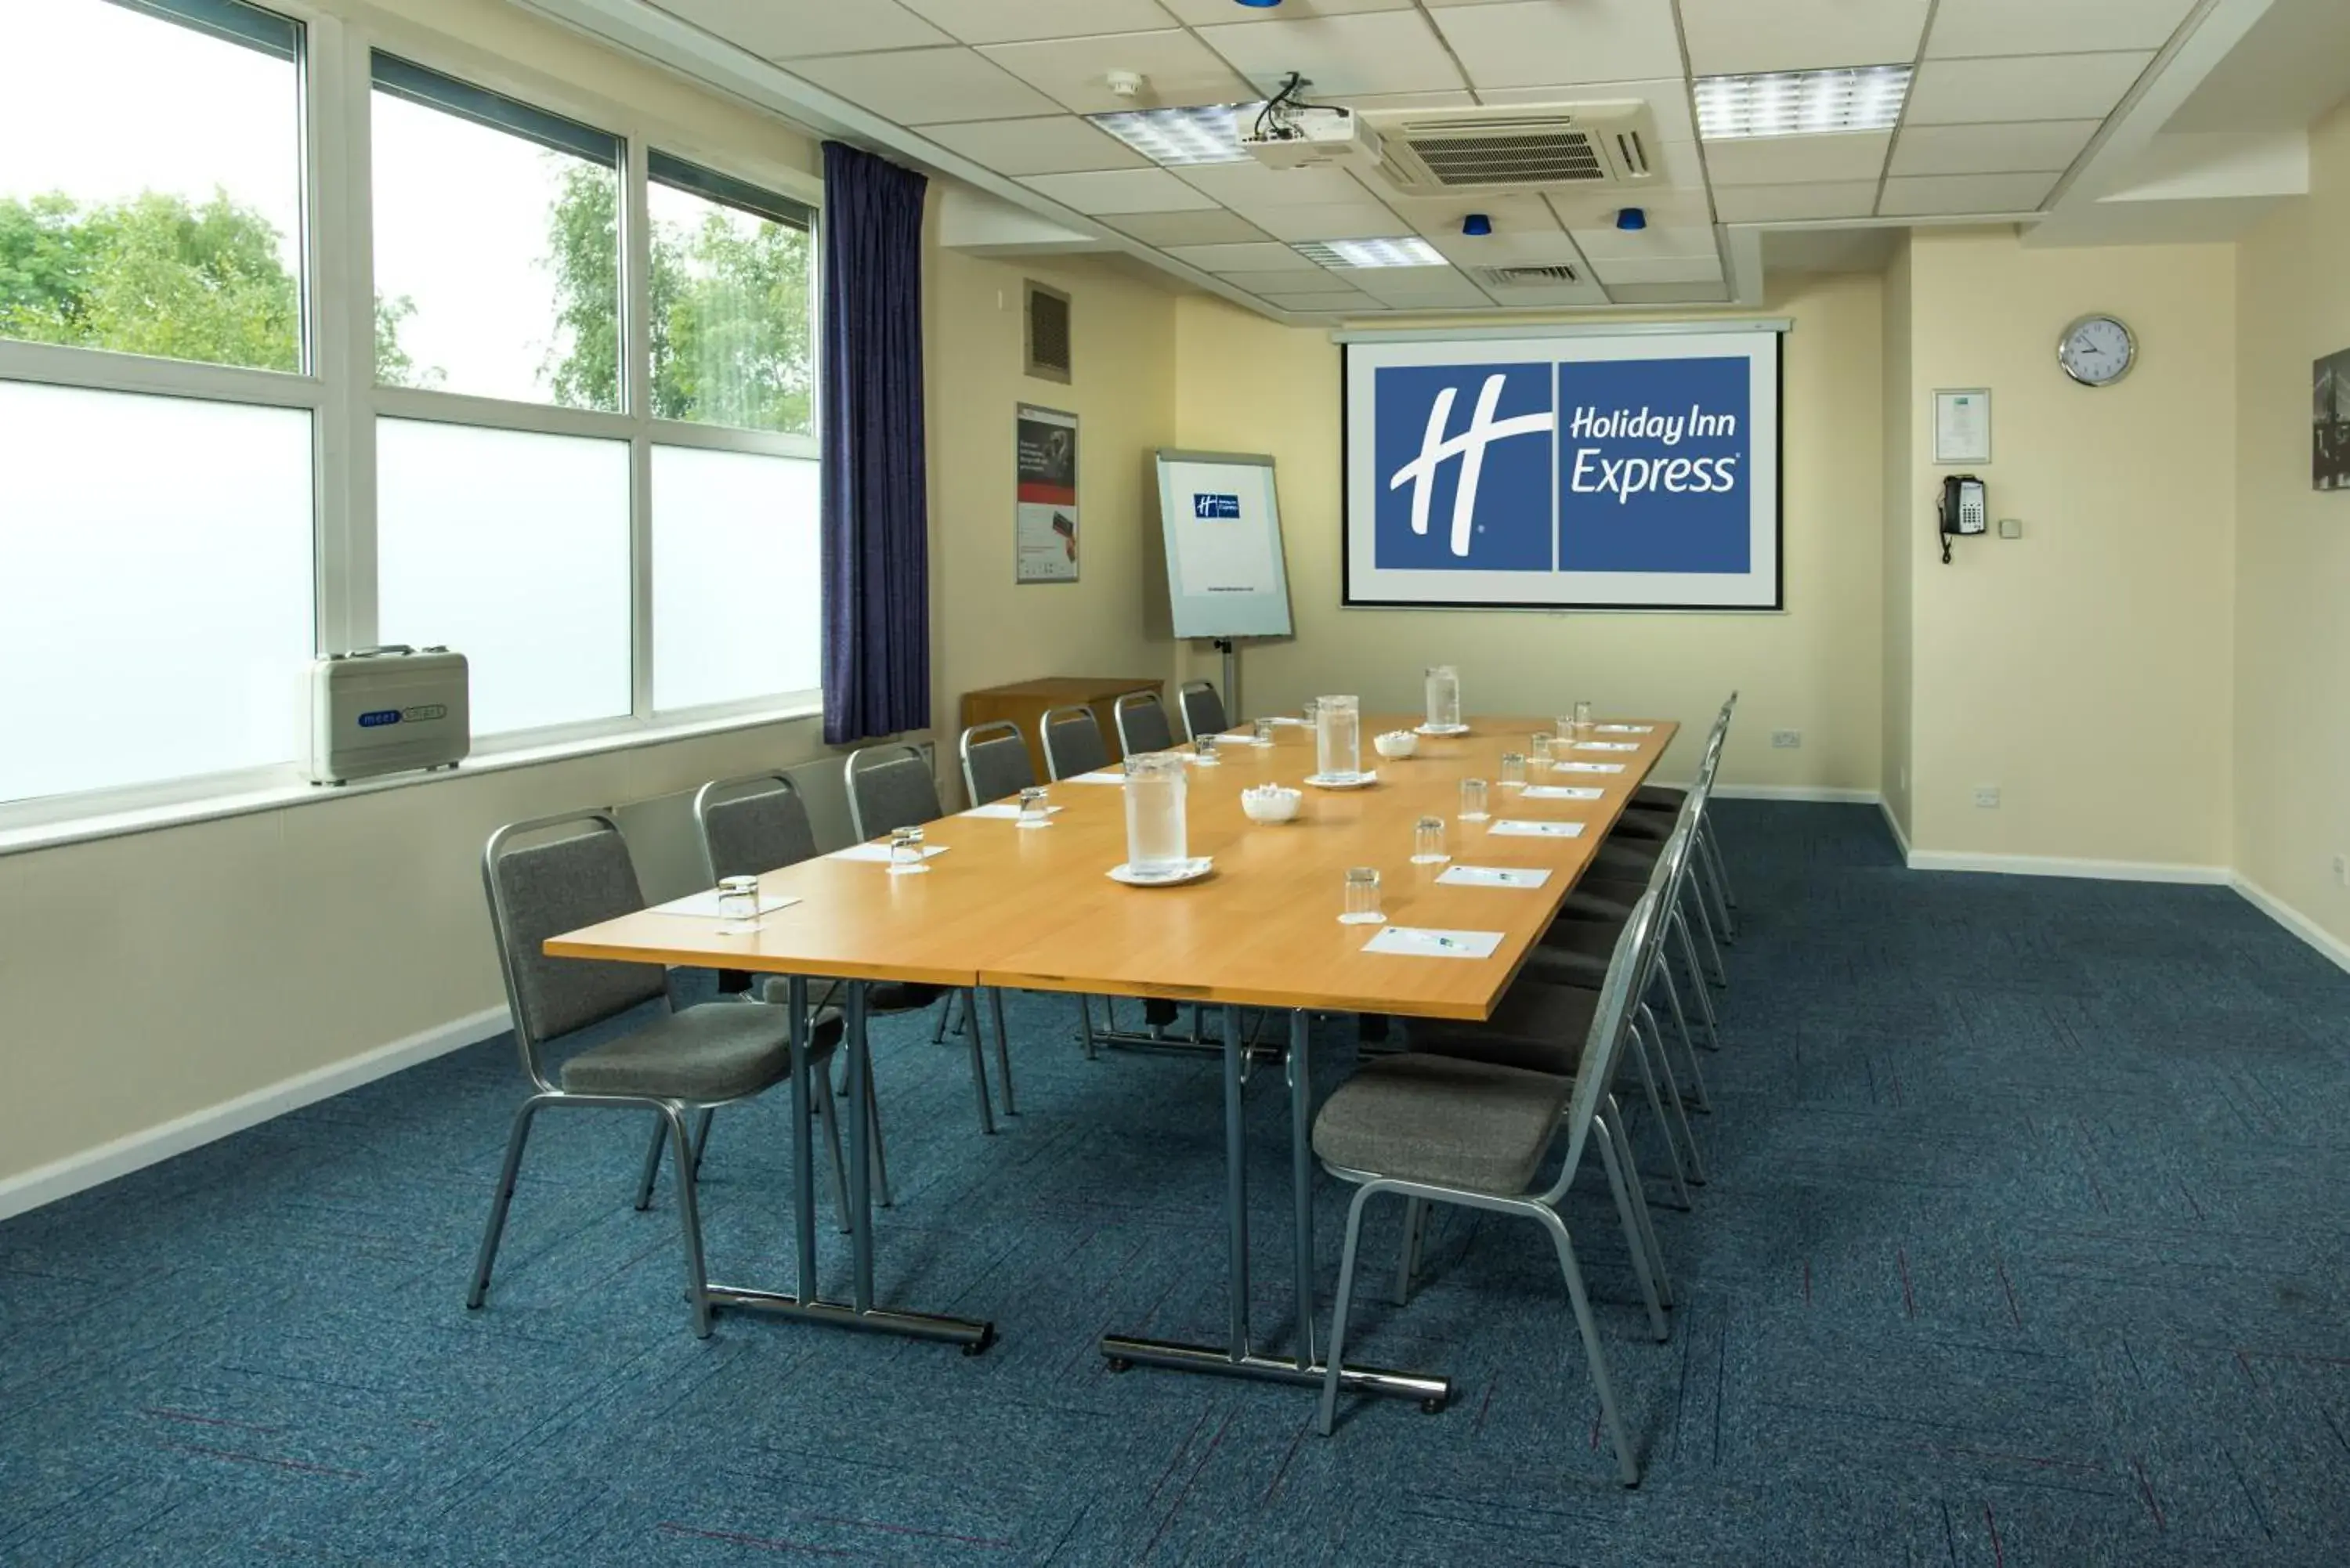 Meeting/conference room in Holiday Inn Express Burton On Trent